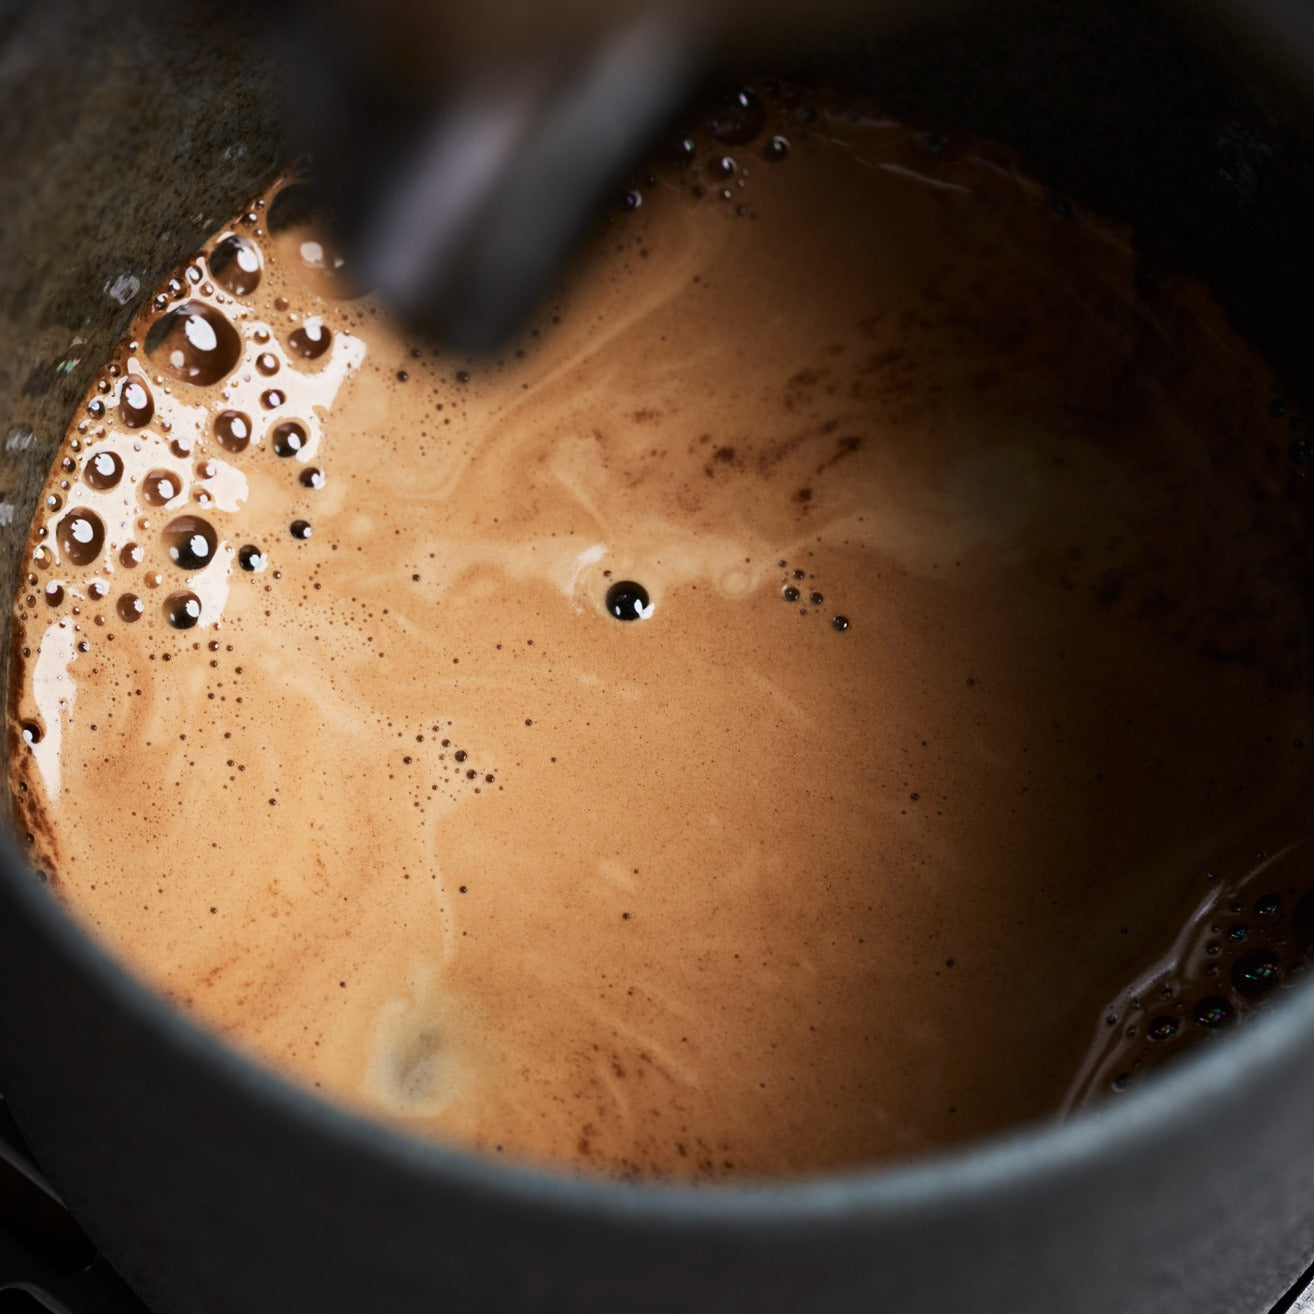 Looking for a better coffee experience? Here’s 5 reasons to make the switch to Emme Mac Black